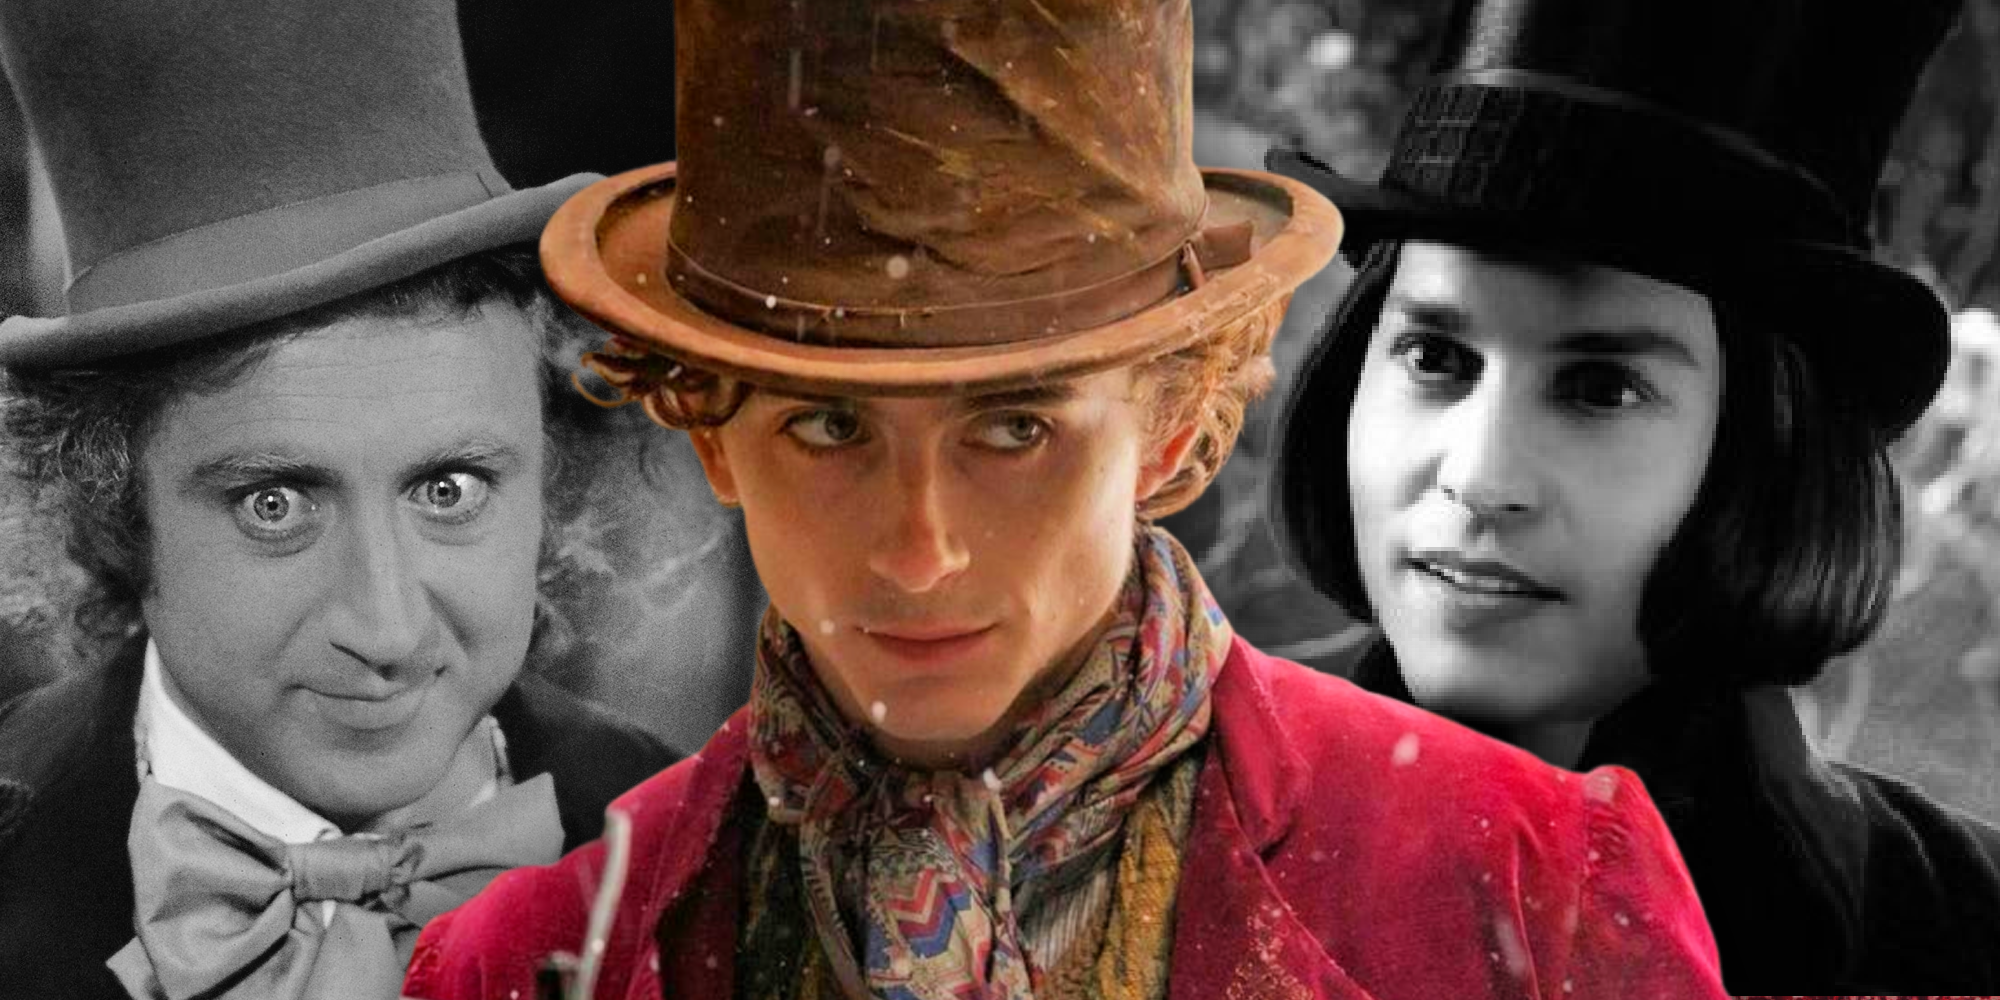 The Wonka First Look Illustrates The Problem With Forced Prequels